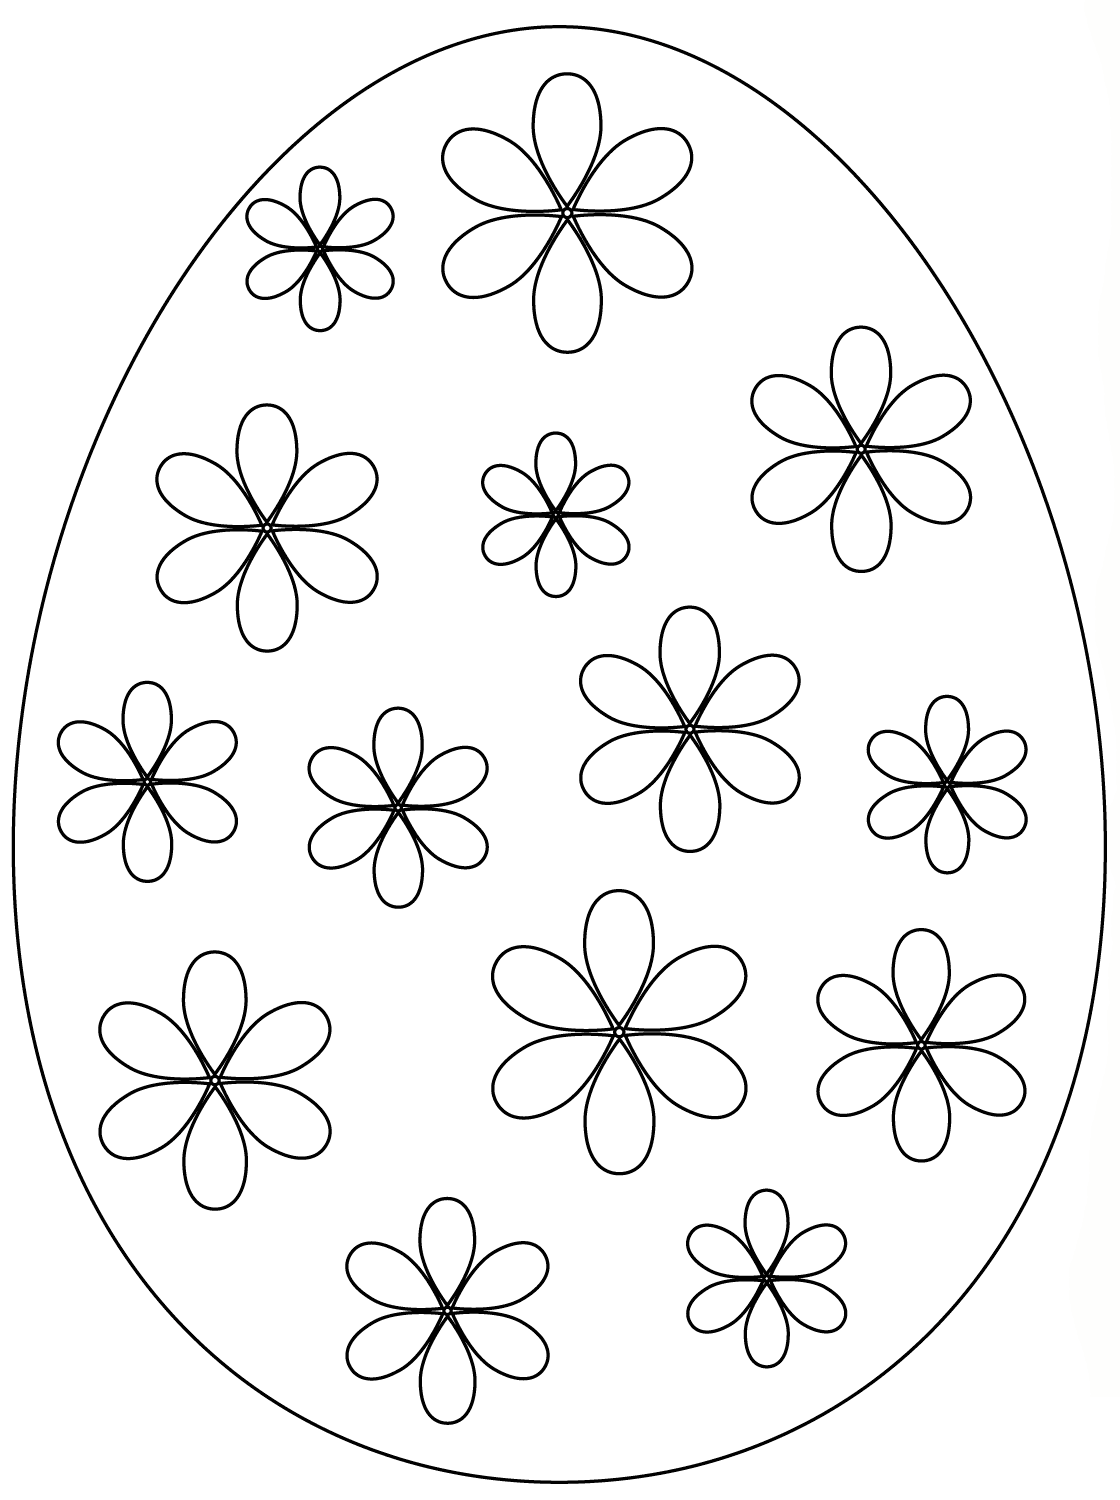 Easter Egg With Flowers